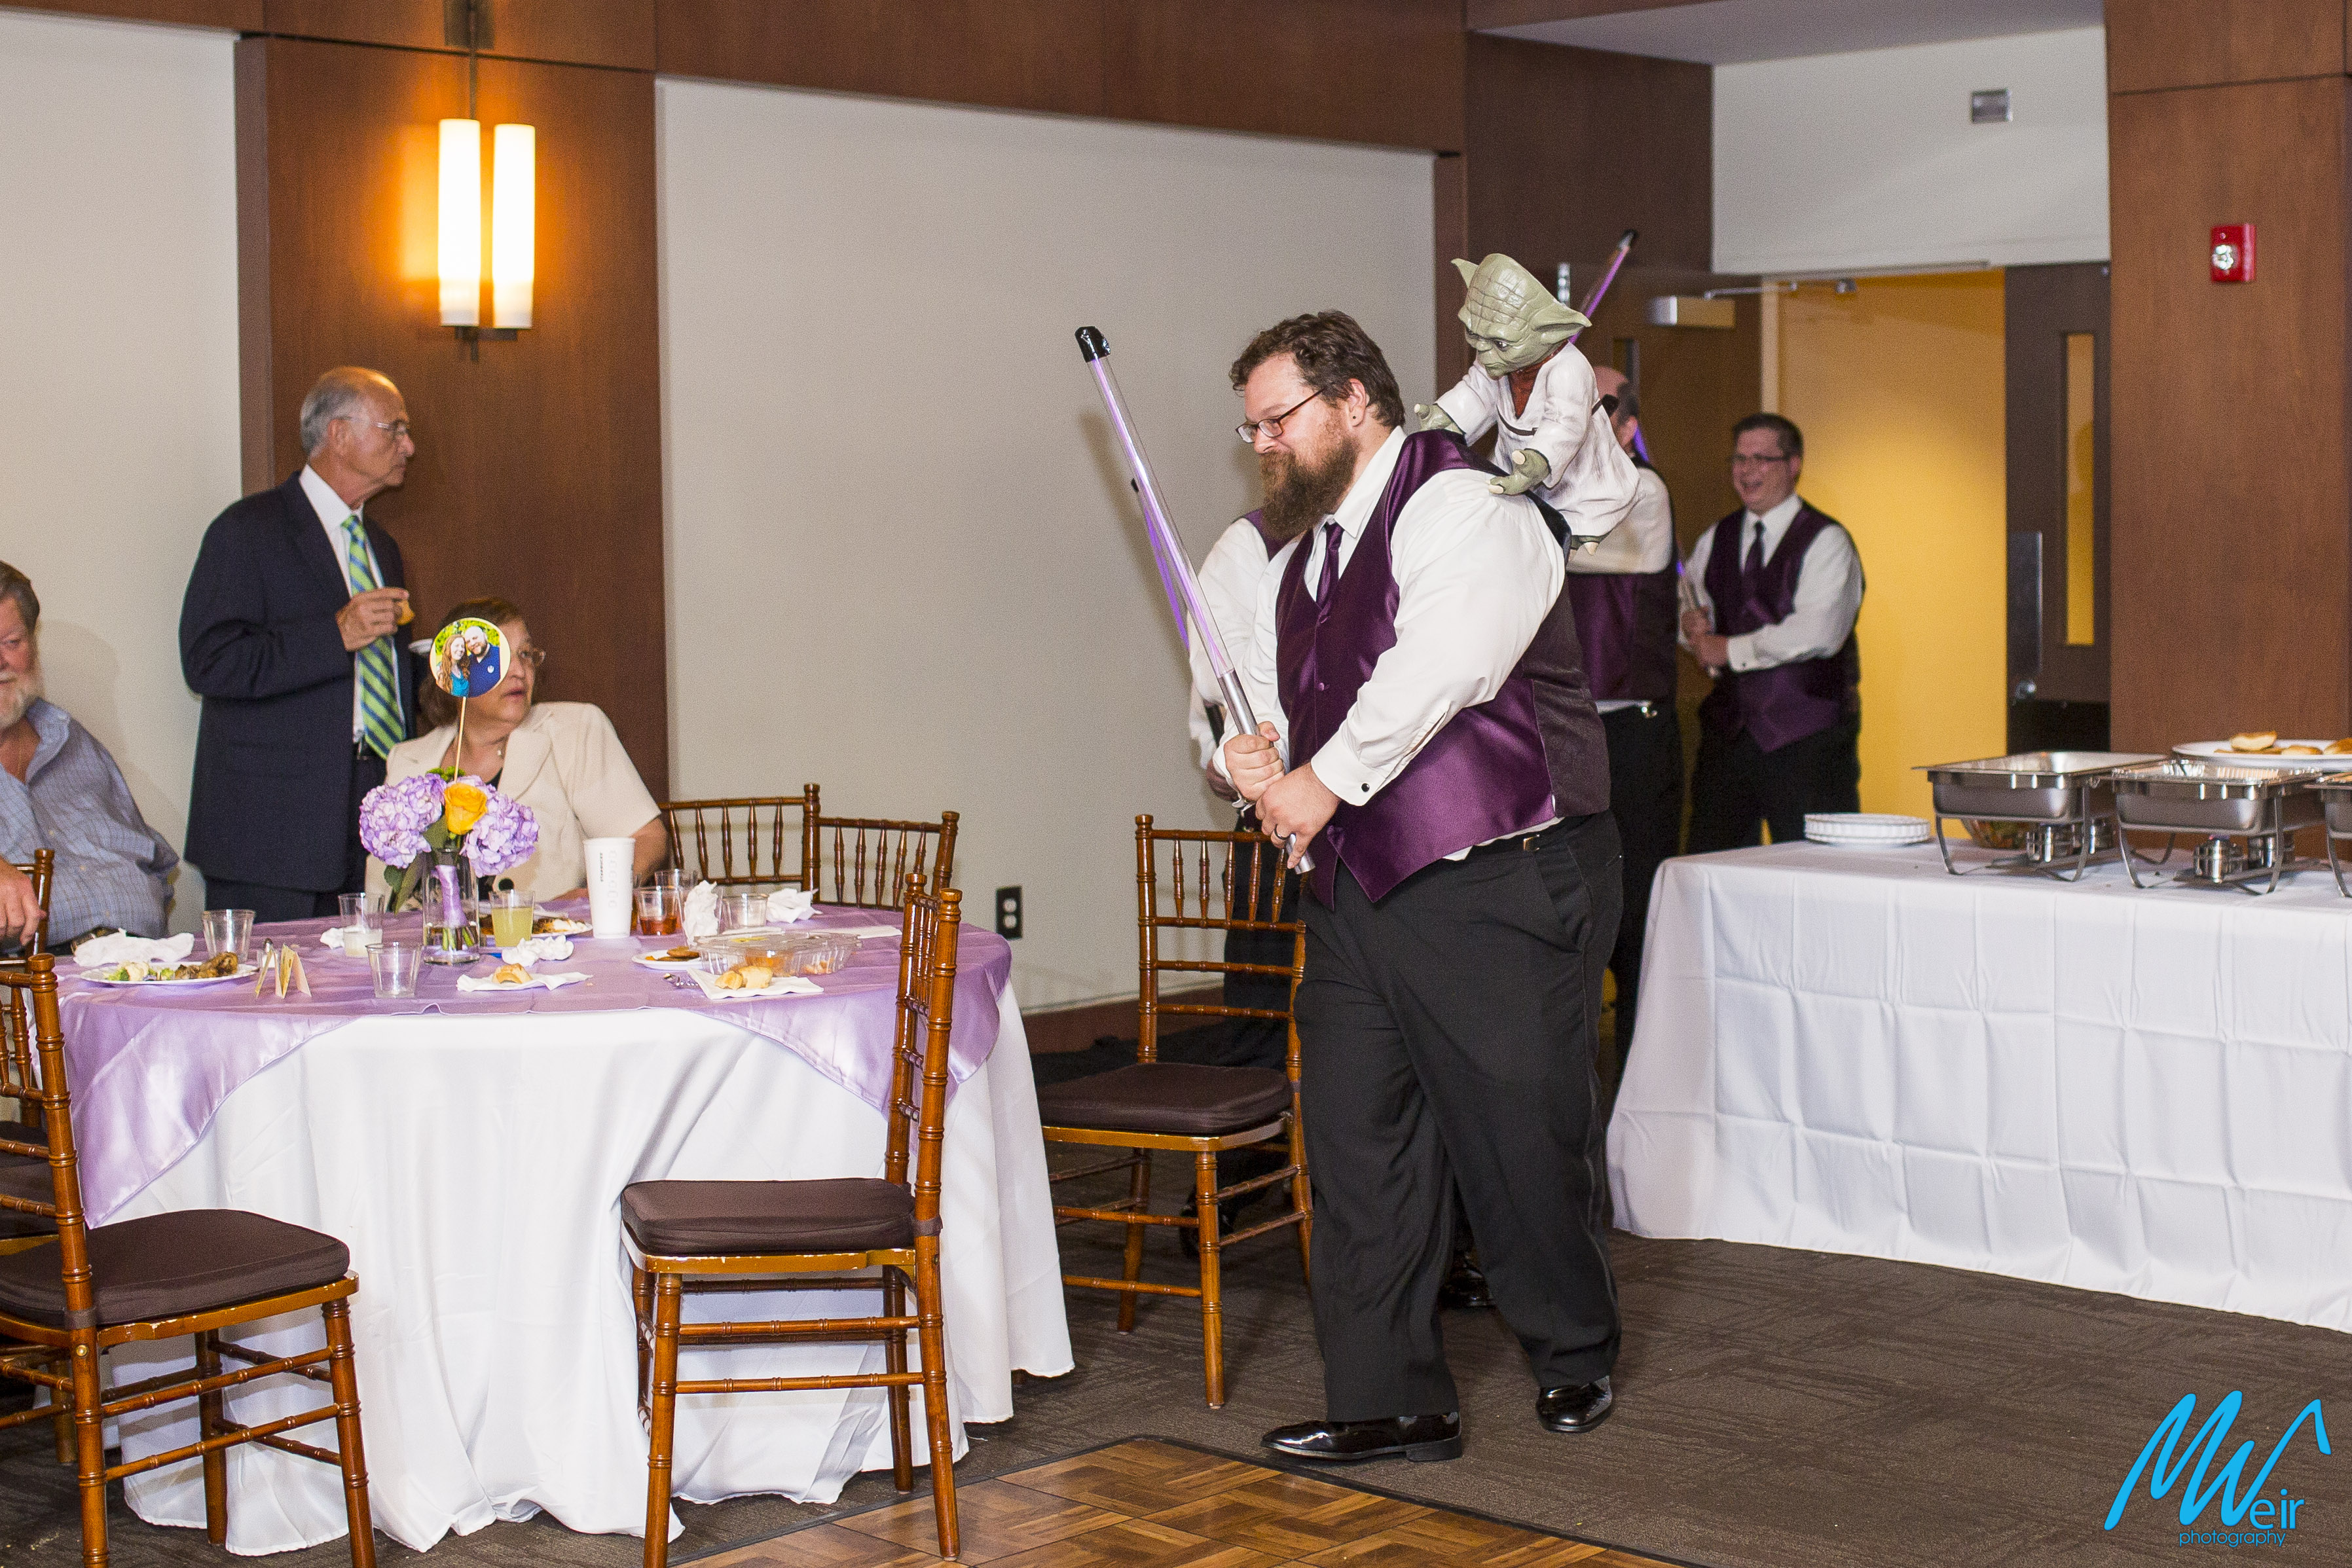 groomsmen surprise groom with star wars light sabers and yoda